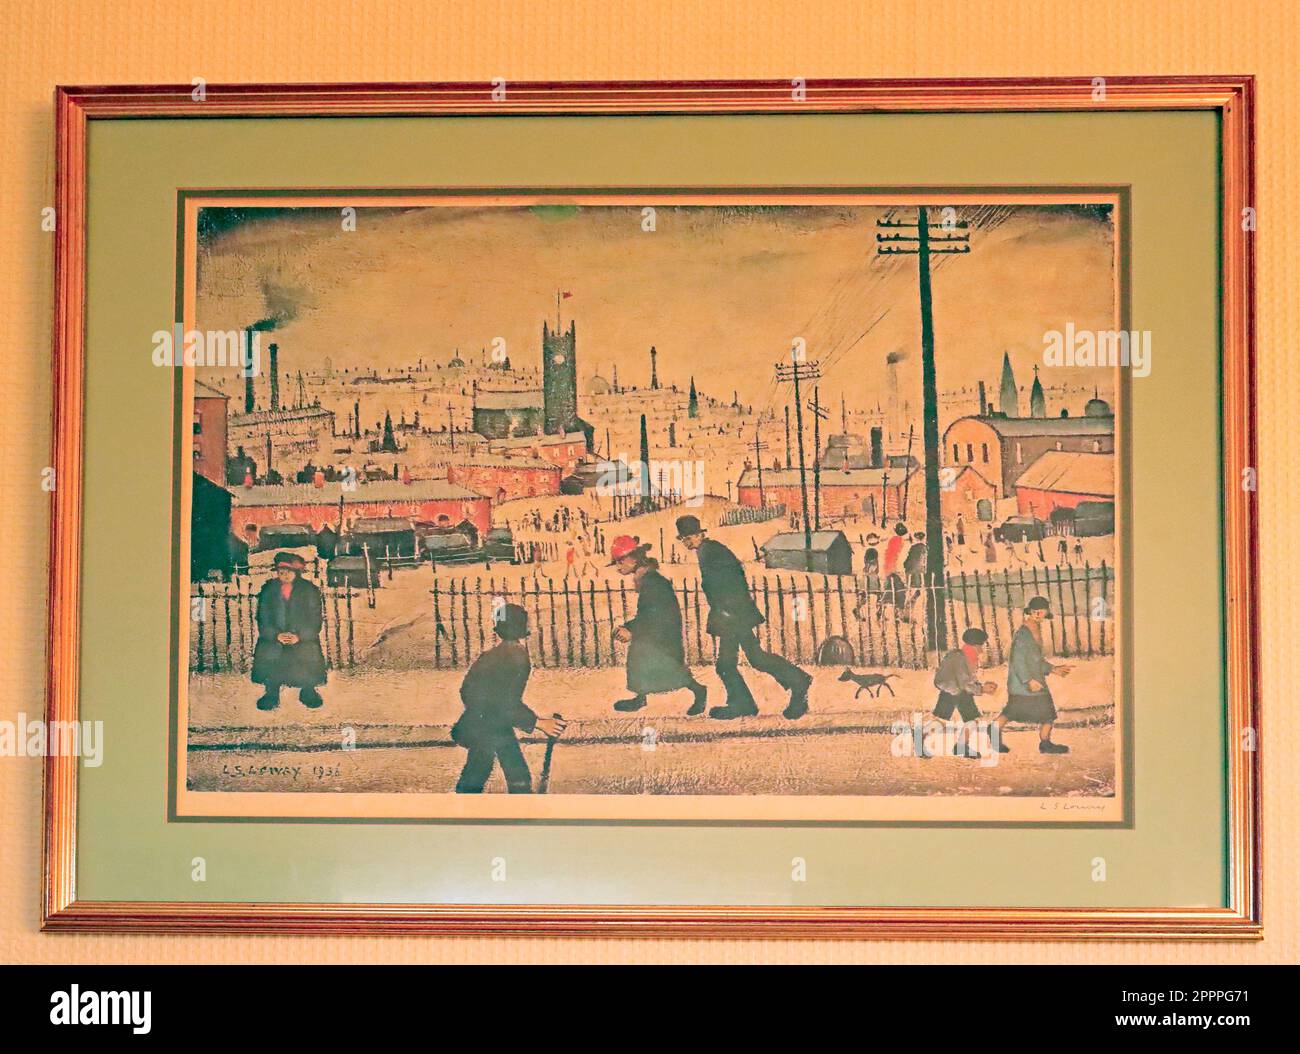 L.S.Lowry framed print  - View of a town - framed and on a wall. Stock Photo